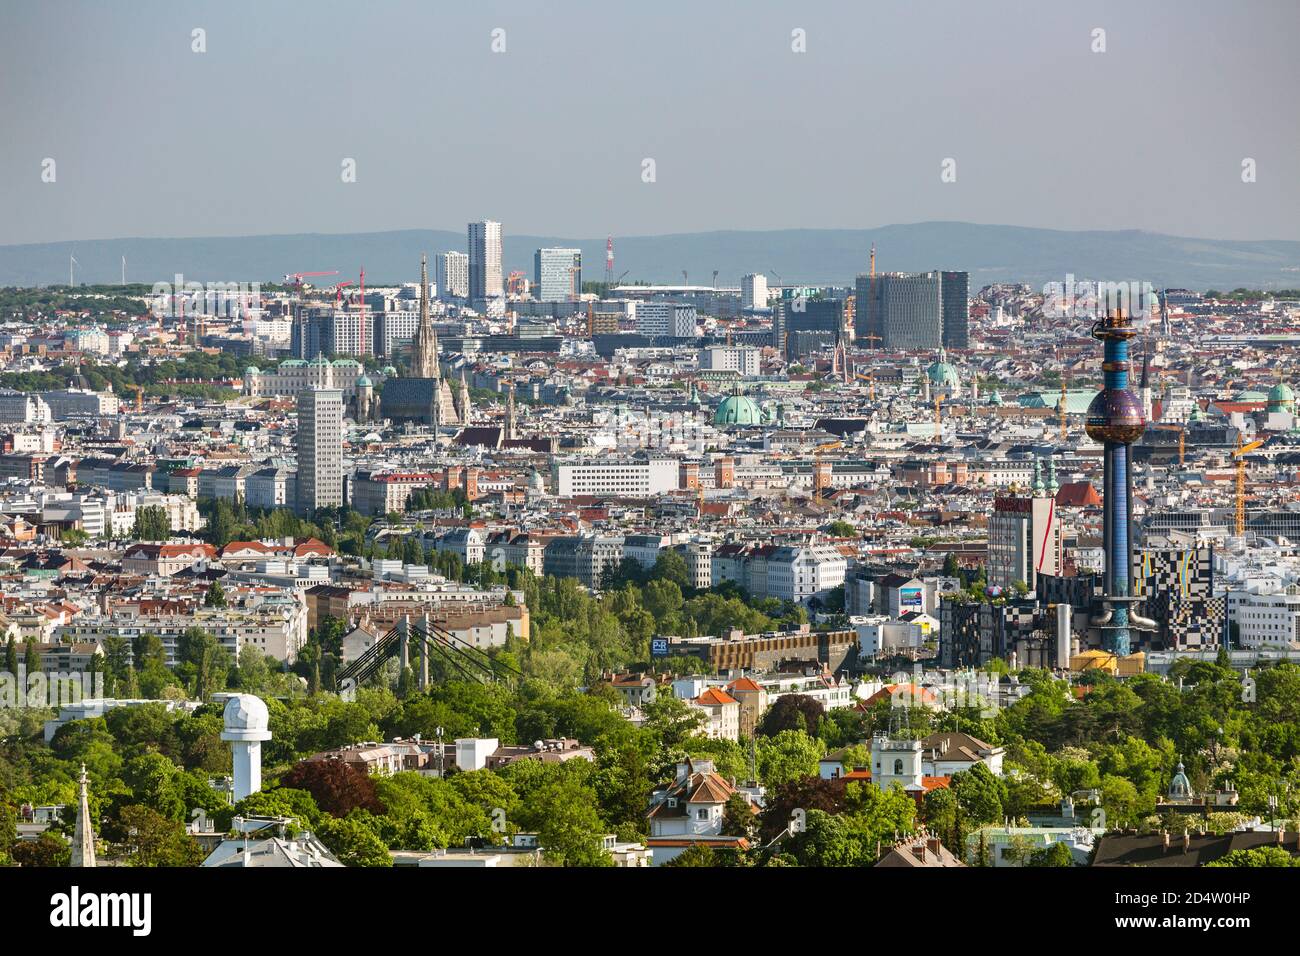 VIENNA - MAY 6: View from a hill to the city center of Vienna with the tower of the waste incineration plant Spittelau to the right, Austria on May 6, Stock Photo